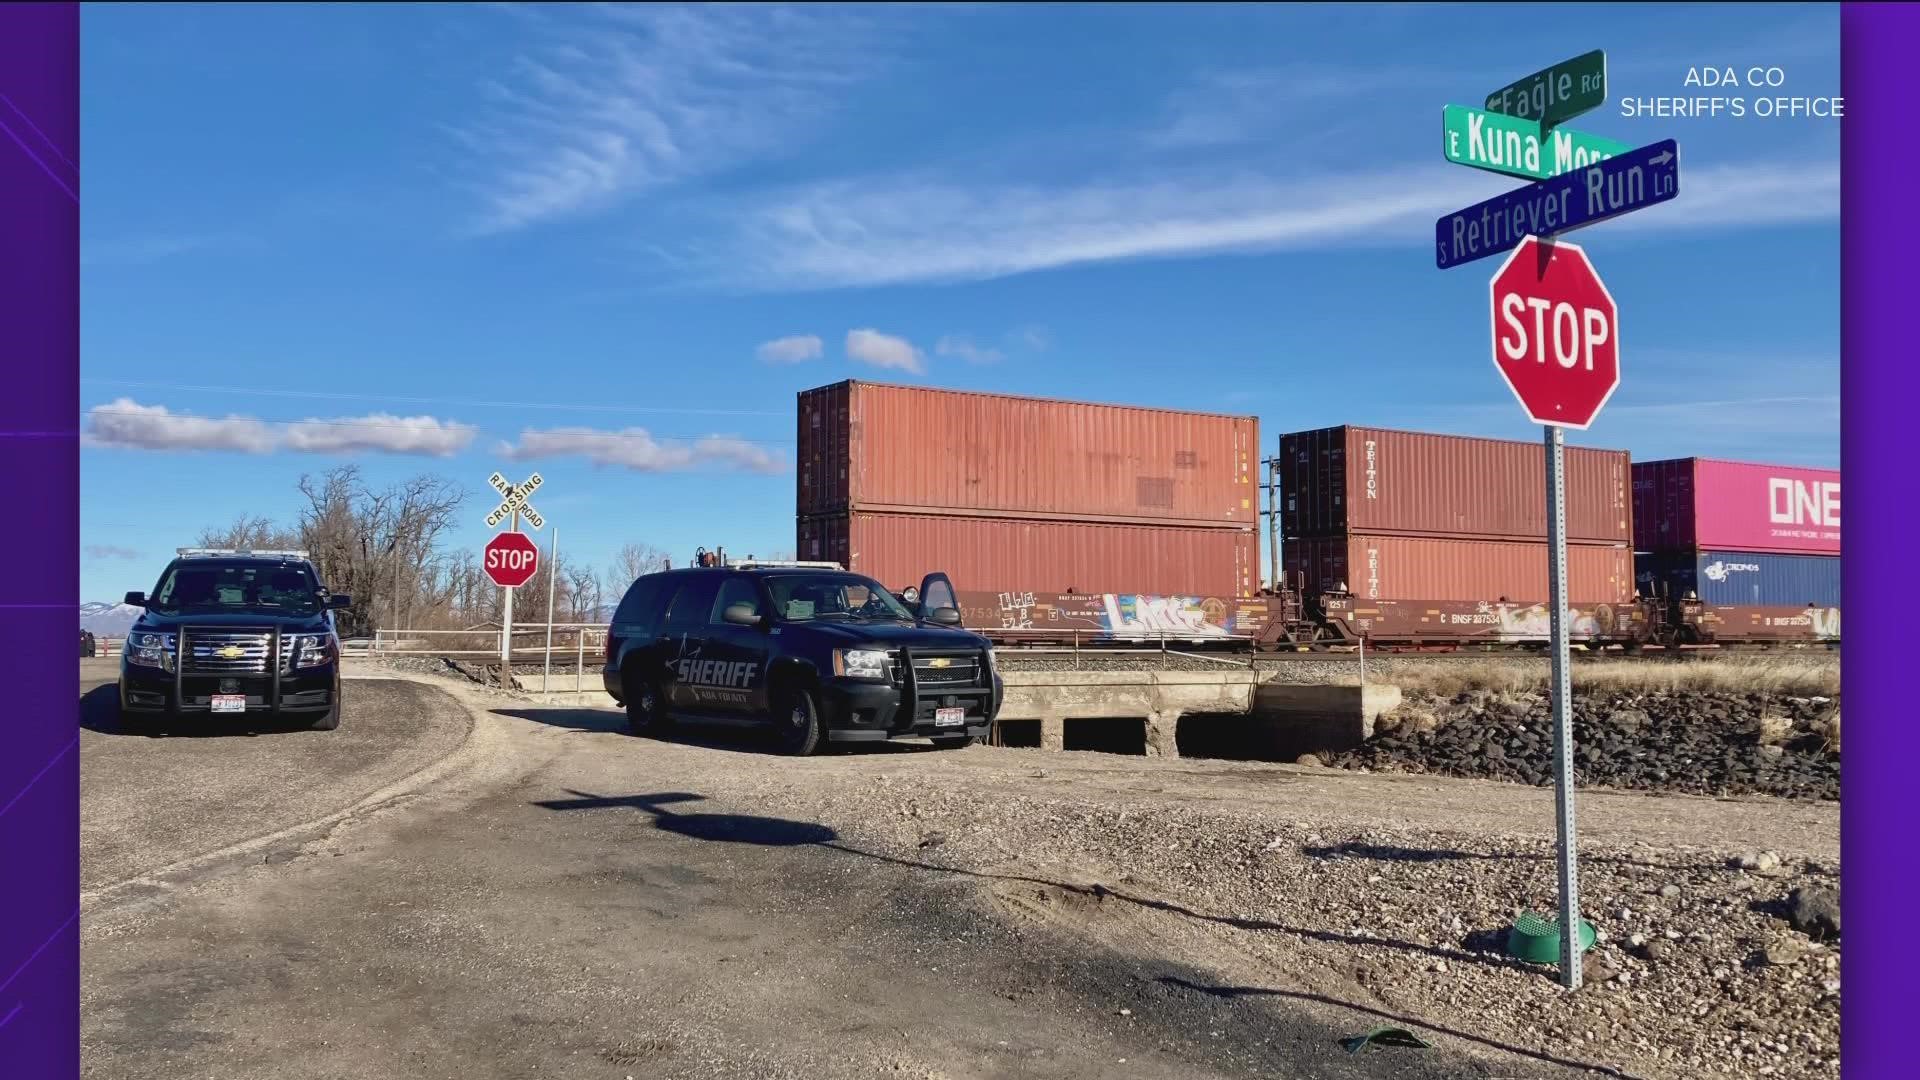 The Ada County Coroner's Office identified the man as 67-year-old Gary Baker, who died trying to drive over train tracks in front of a passing train.